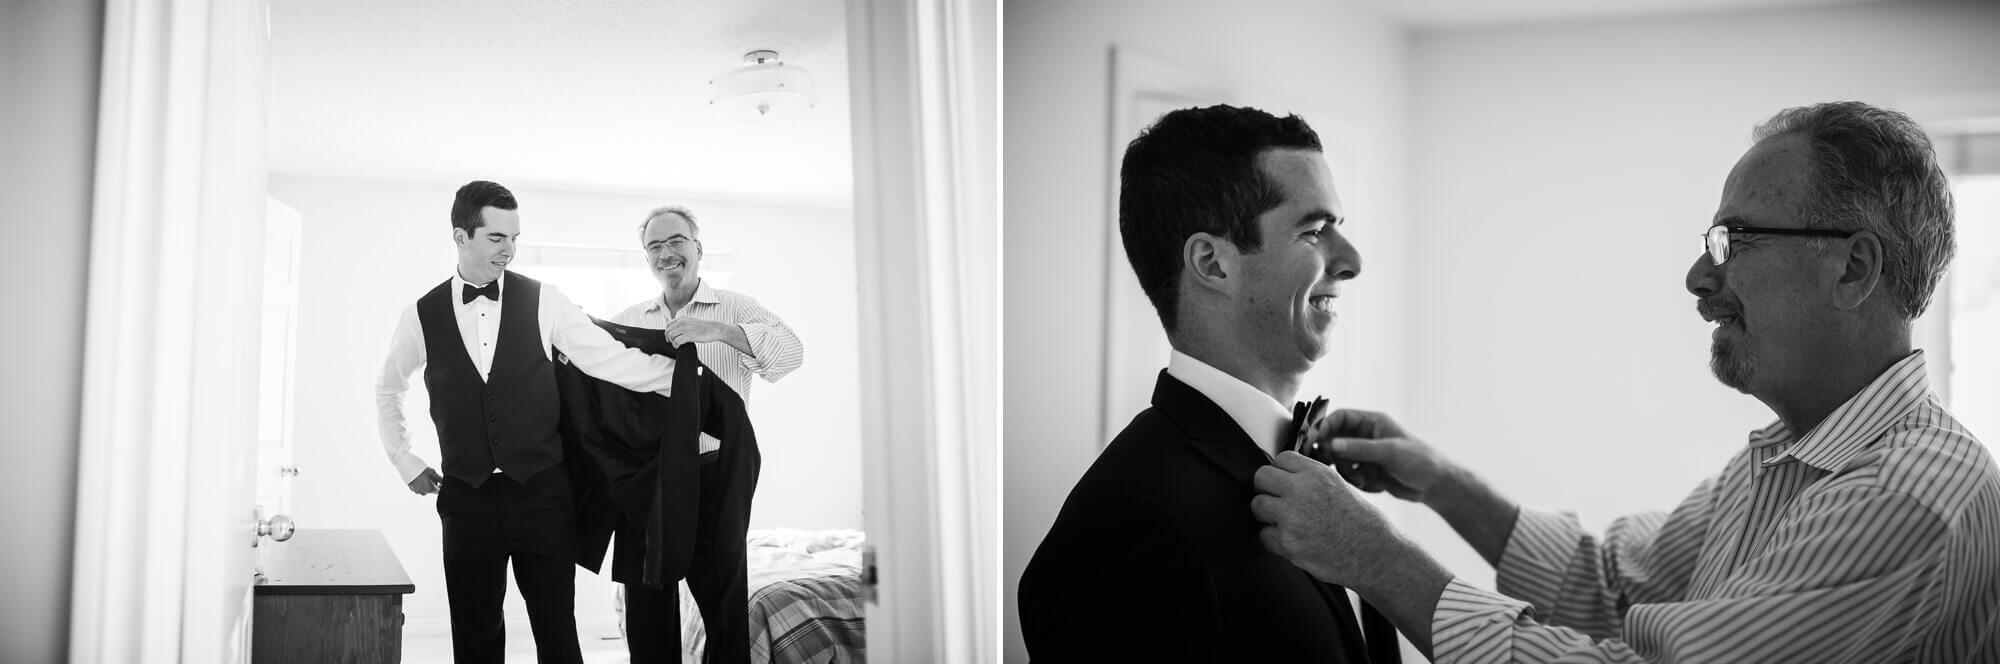 Getting ready shoot of the groom getting his suit and tie done up.